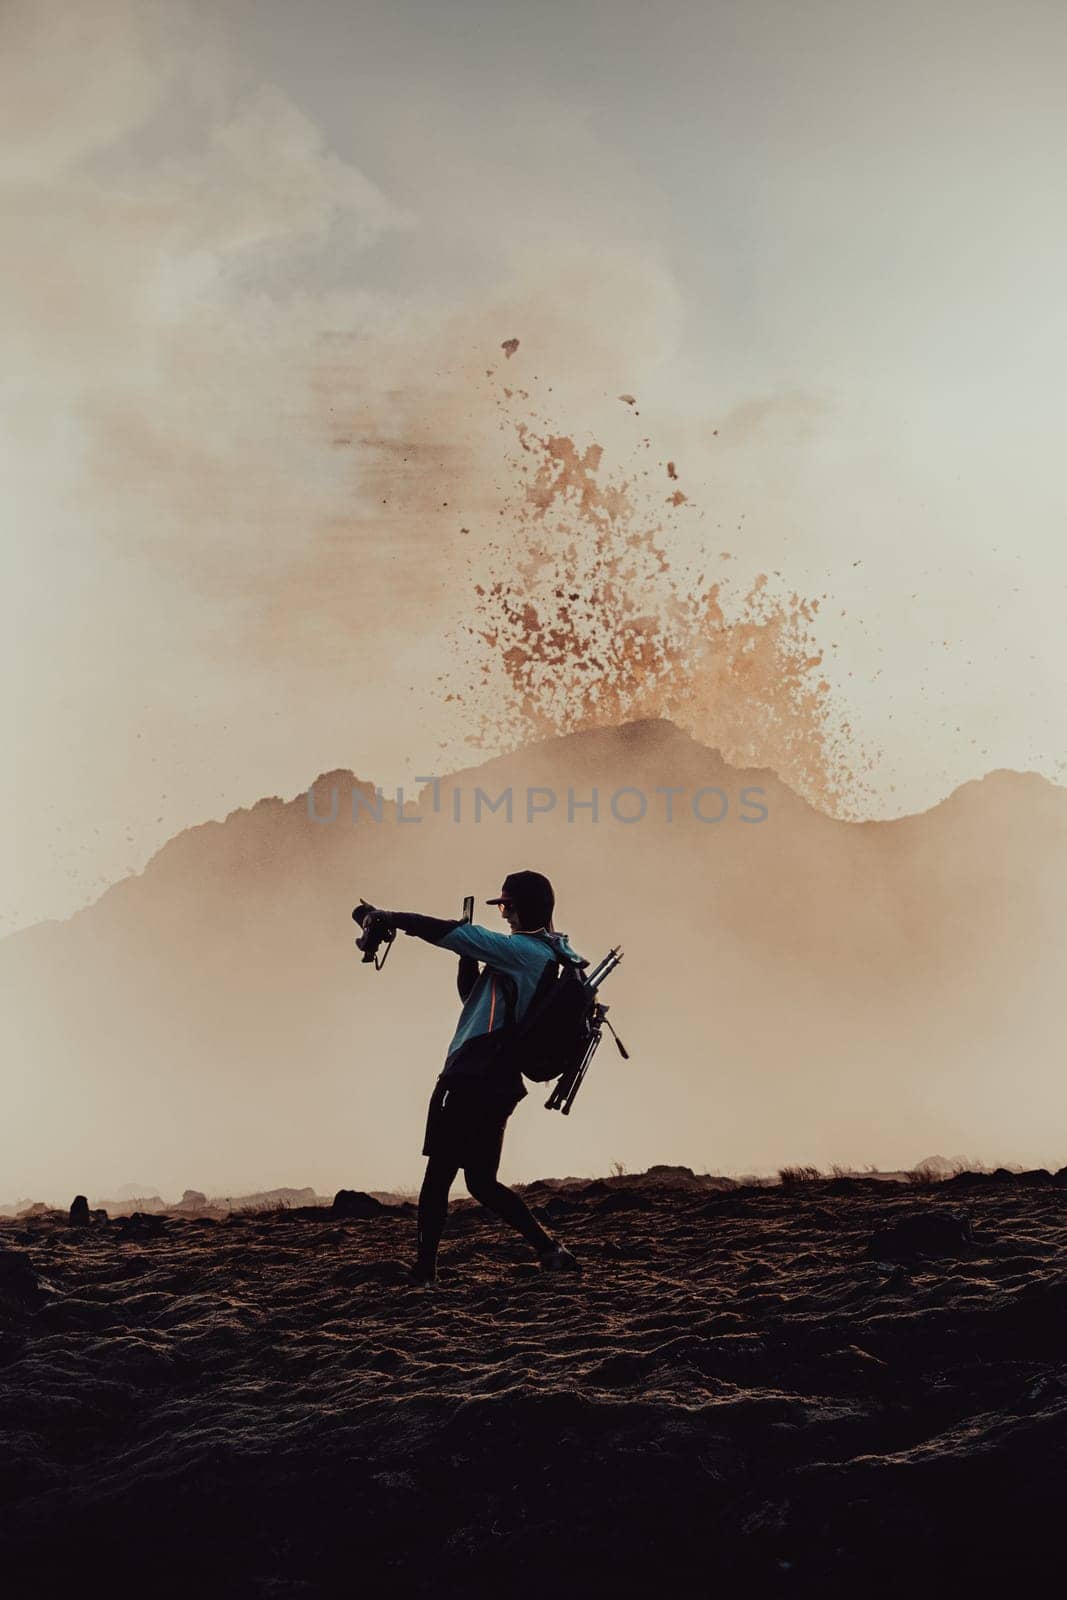 An epic side shot of a guy in a blue jacket, with hiking equipment and a backpack, trekking poles, a tripod, and a camera takes a shot in an active special stance. Covered with a smoke volcano with erupting lava in the background. 2023 Litli-Hrutur volcano eruption, Fagradalsfjall Volcano, Reykjanes Peninsula, Iceland.